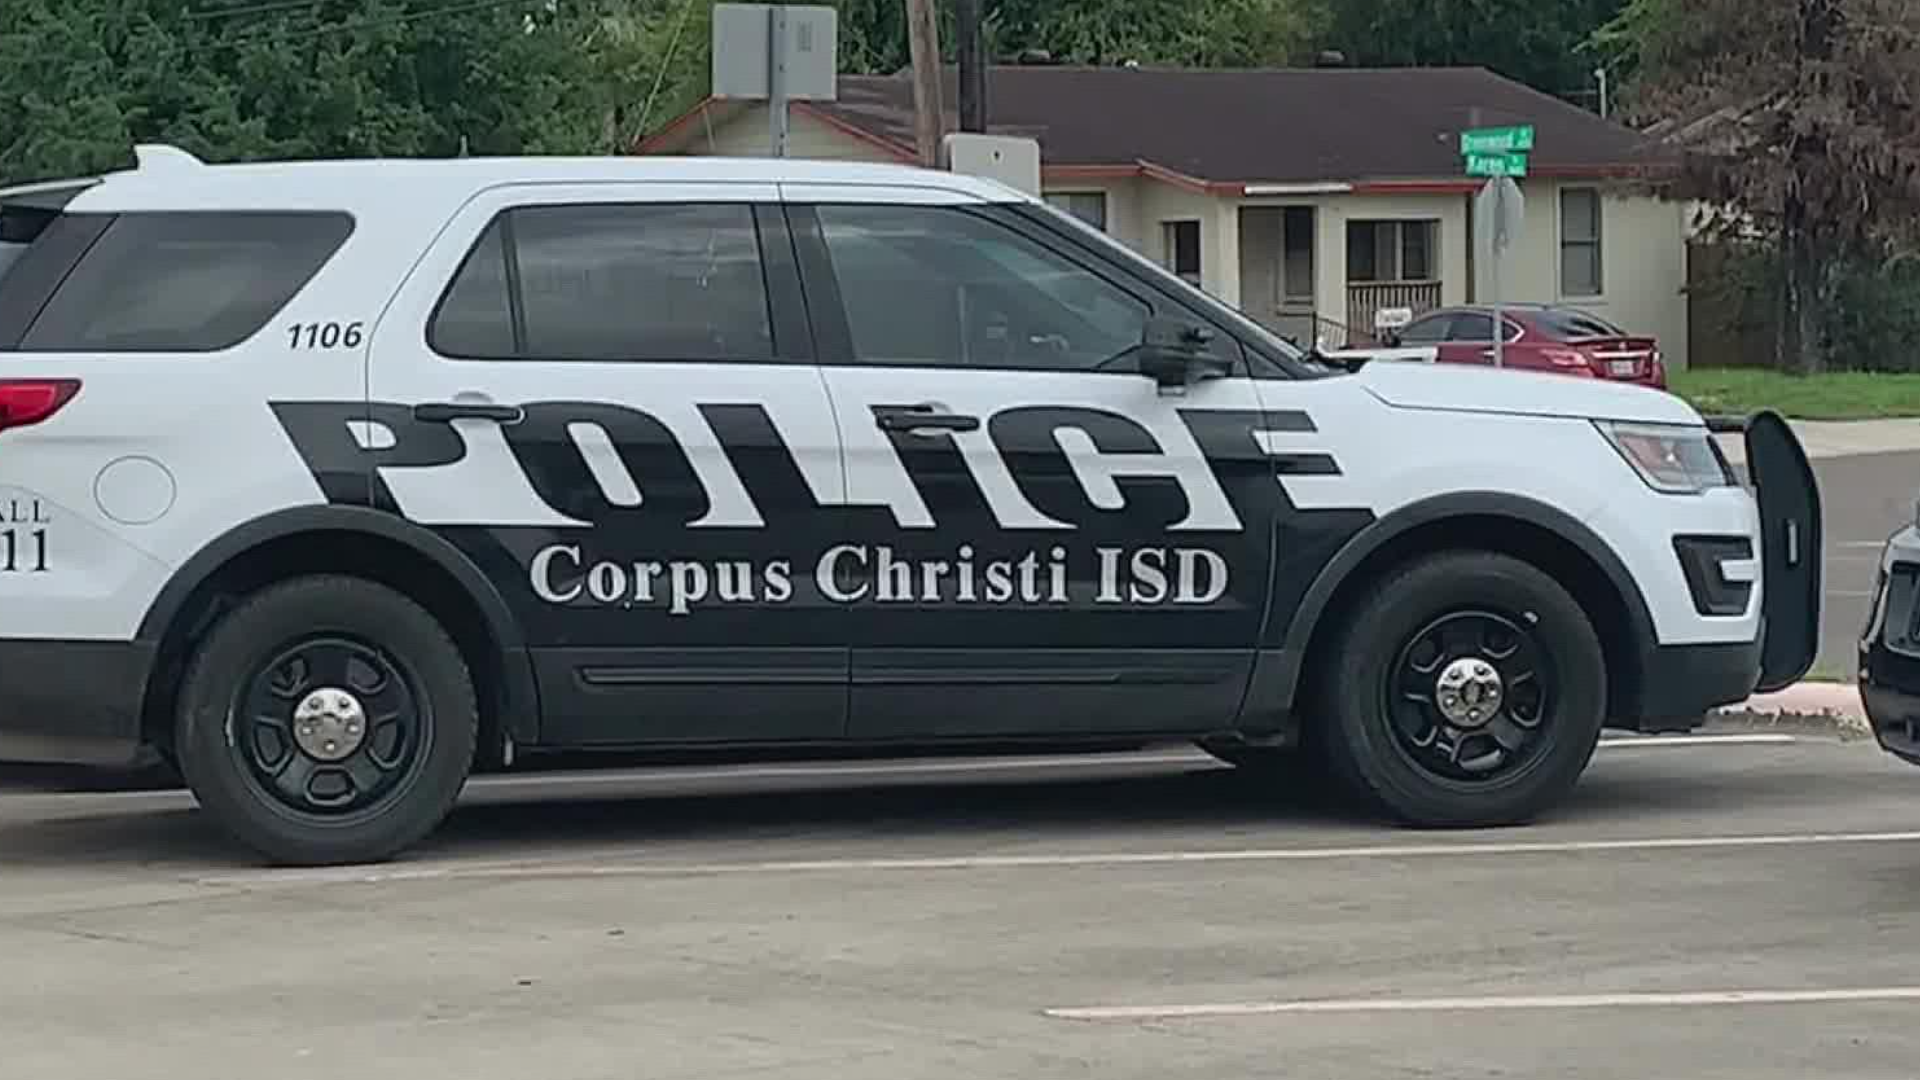 "We practice for response because we have to, but my fervent wish is that we never have to respond to a situation like that,” said CCISD Chief of Police Kirby Warnke